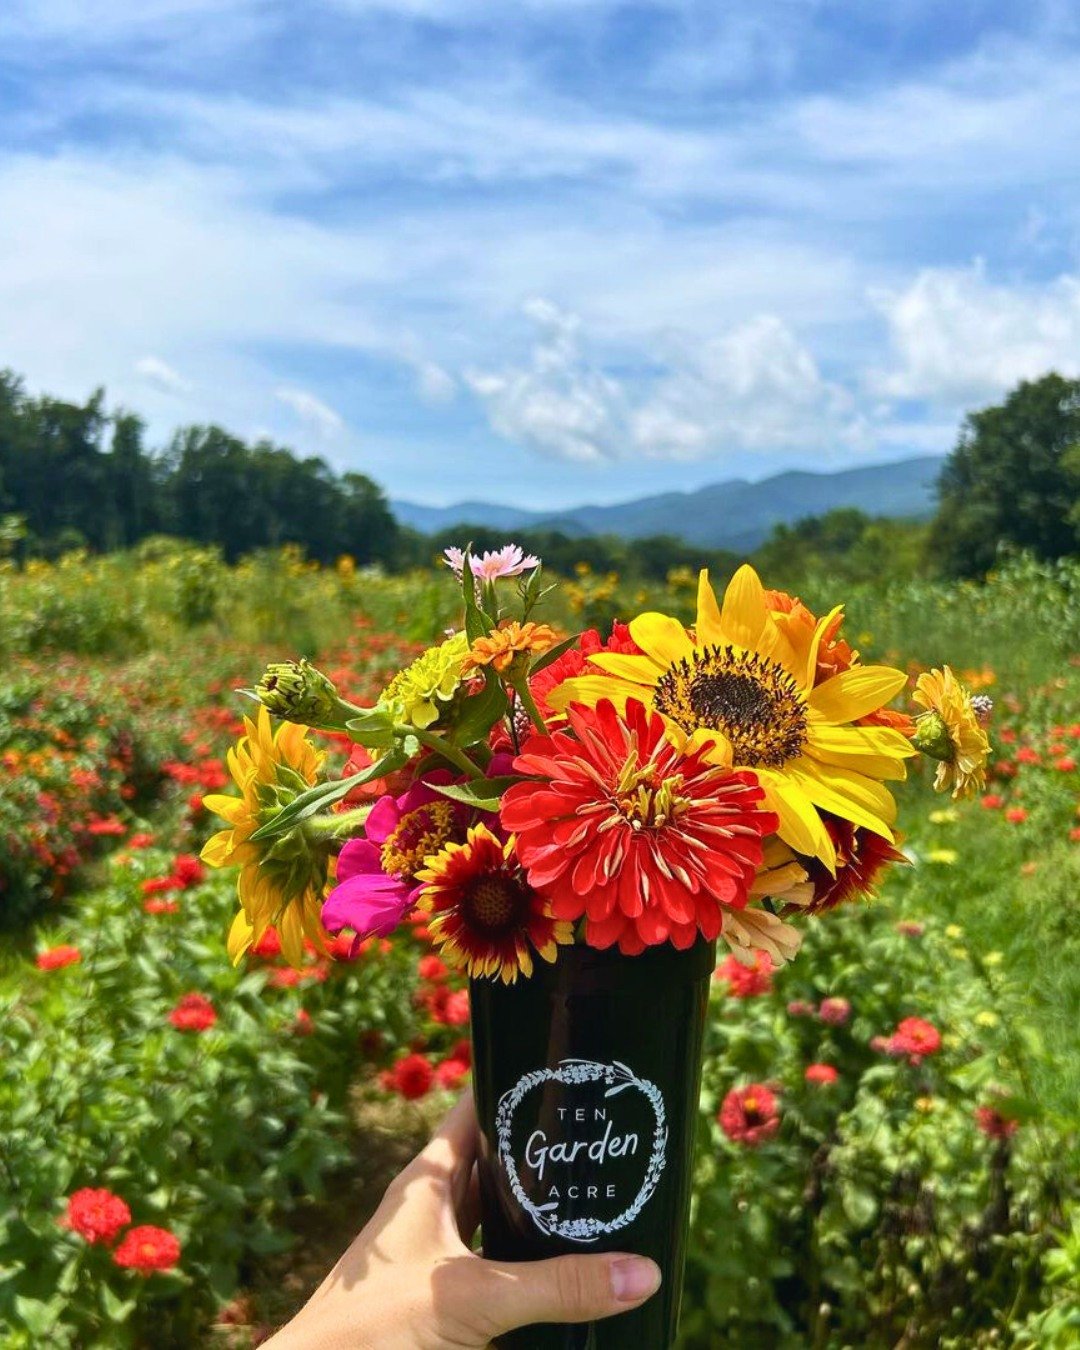 Do you live near Asheville? 🗻Do you love farm veggies, u-pick berries and fresh cut flowers? 🍓🌸Then you should know about @thetenacregarden! This farm with over 150-years of history is holding a Grand Re-Opening event on Saturday, April 27th. ✨

T